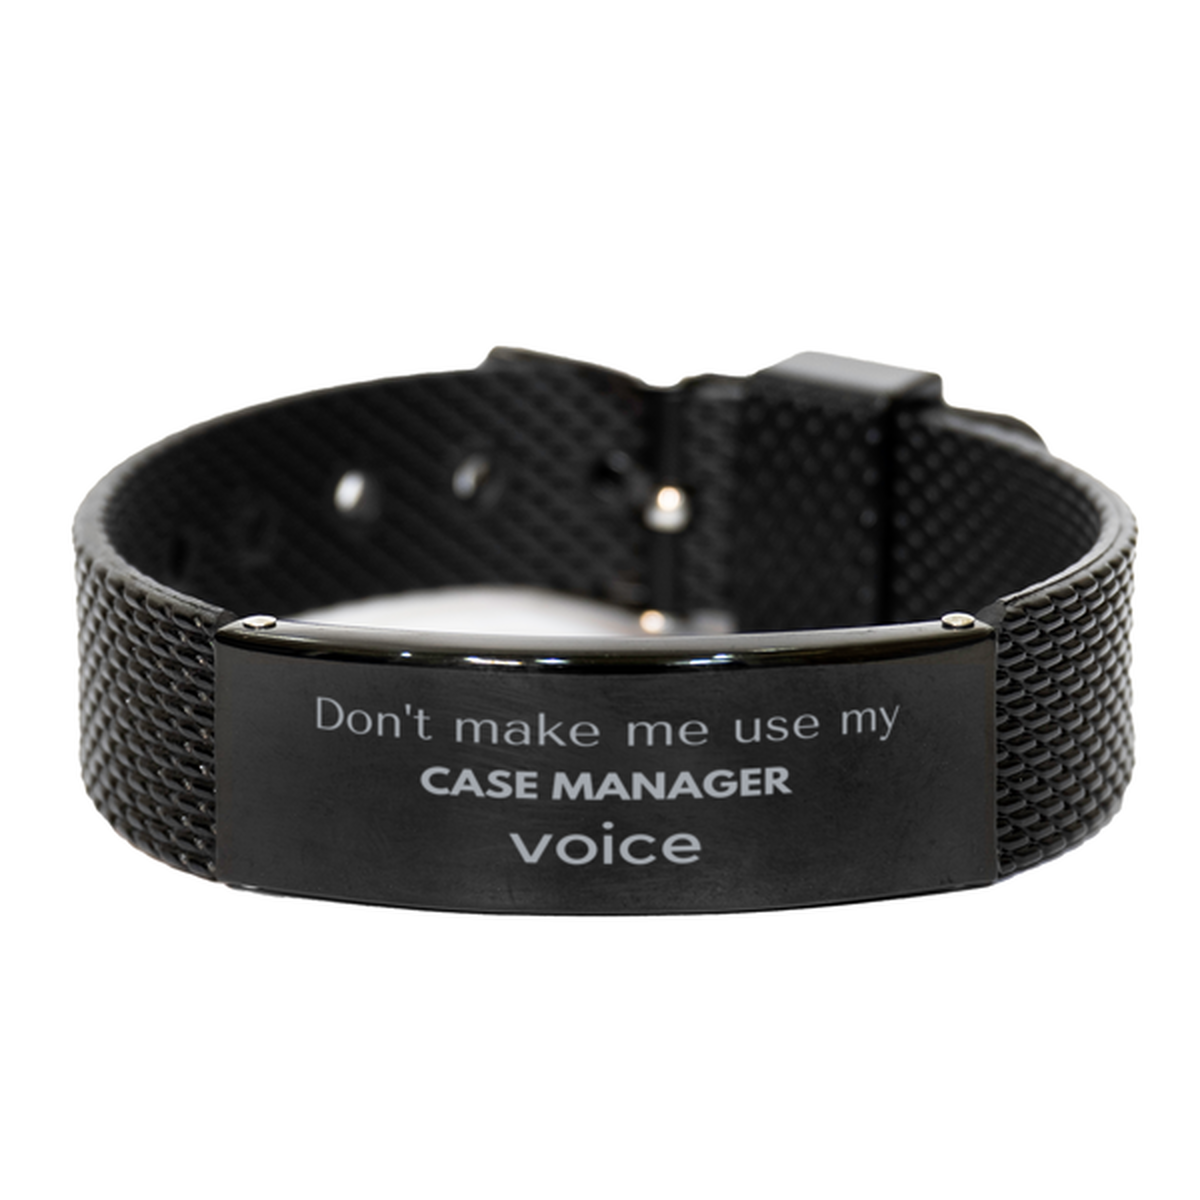 Don't make me use my Case Manager voice, Sarcasm Case Manager Gifts, Christmas Case Manager Black Shark Mesh Bracelet Birthday Unique Gifts For Case Manager Coworkers, Men, Women, Colleague, Friends